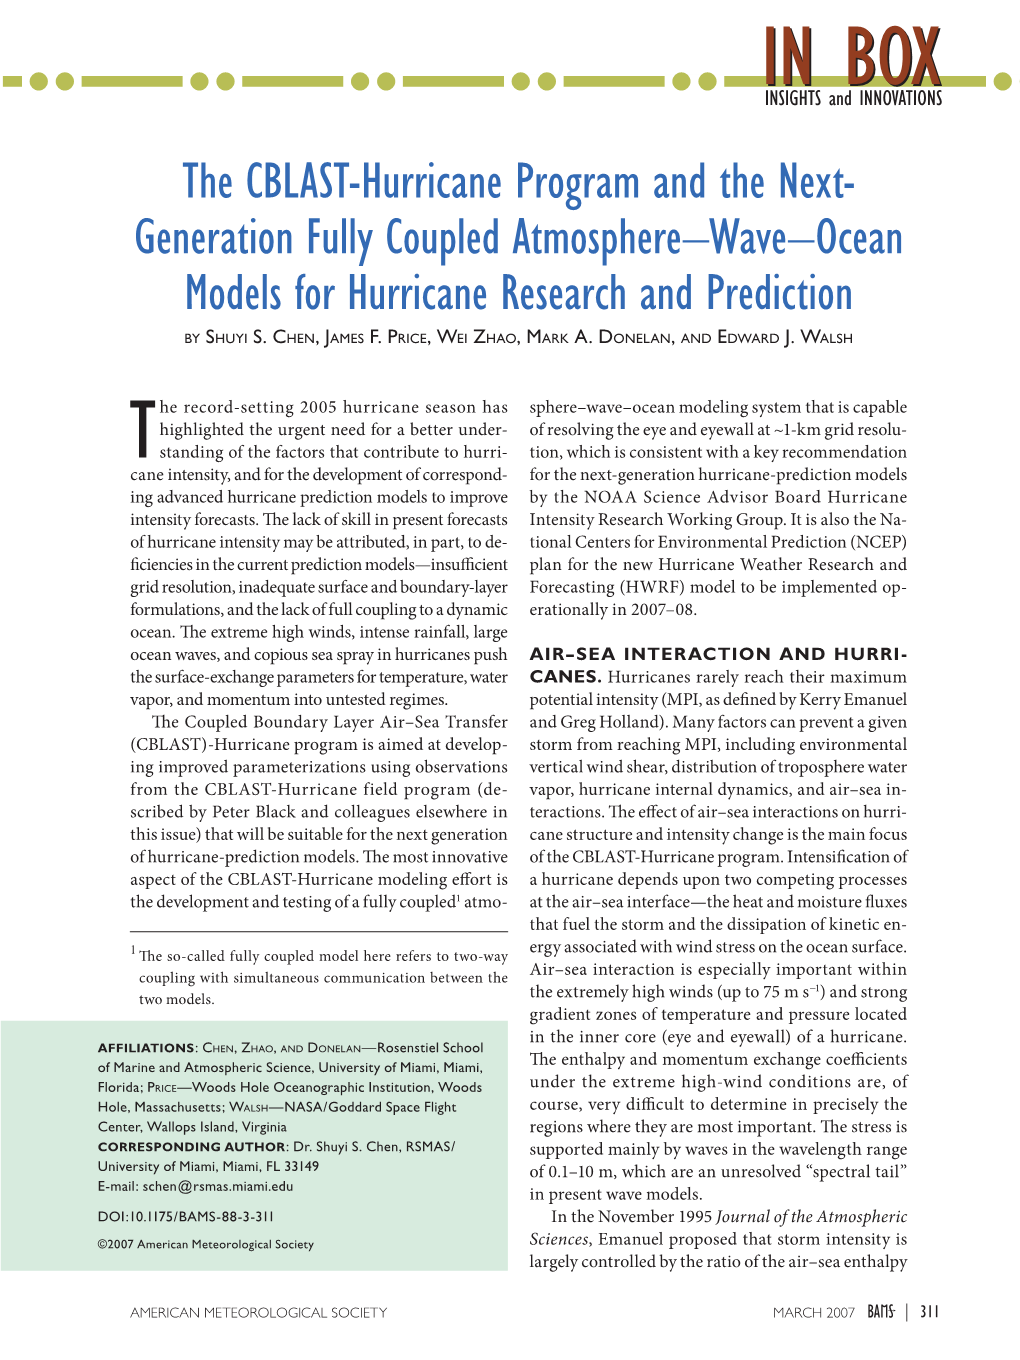 The CBLAST-Hurricane Program and the Next- Generation Fully Coupled Atmosphere–Wave–Ocean Models for Hurricane Research and Prediction by SHUYI S